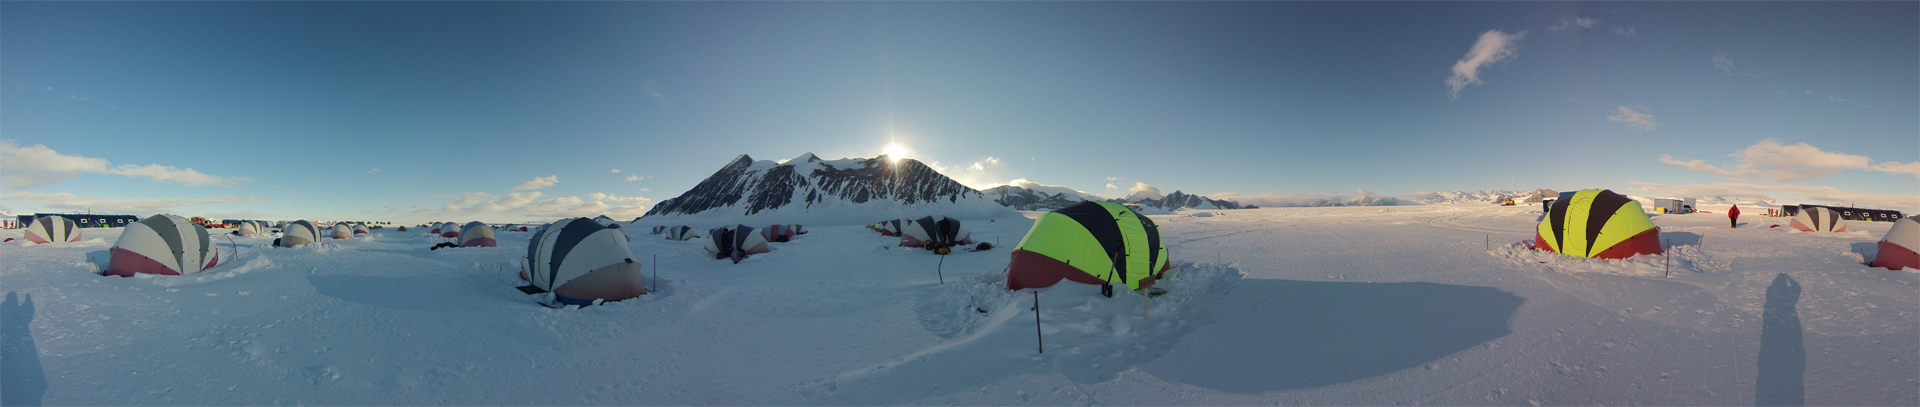 Panorama of Union Glacier camp from tents